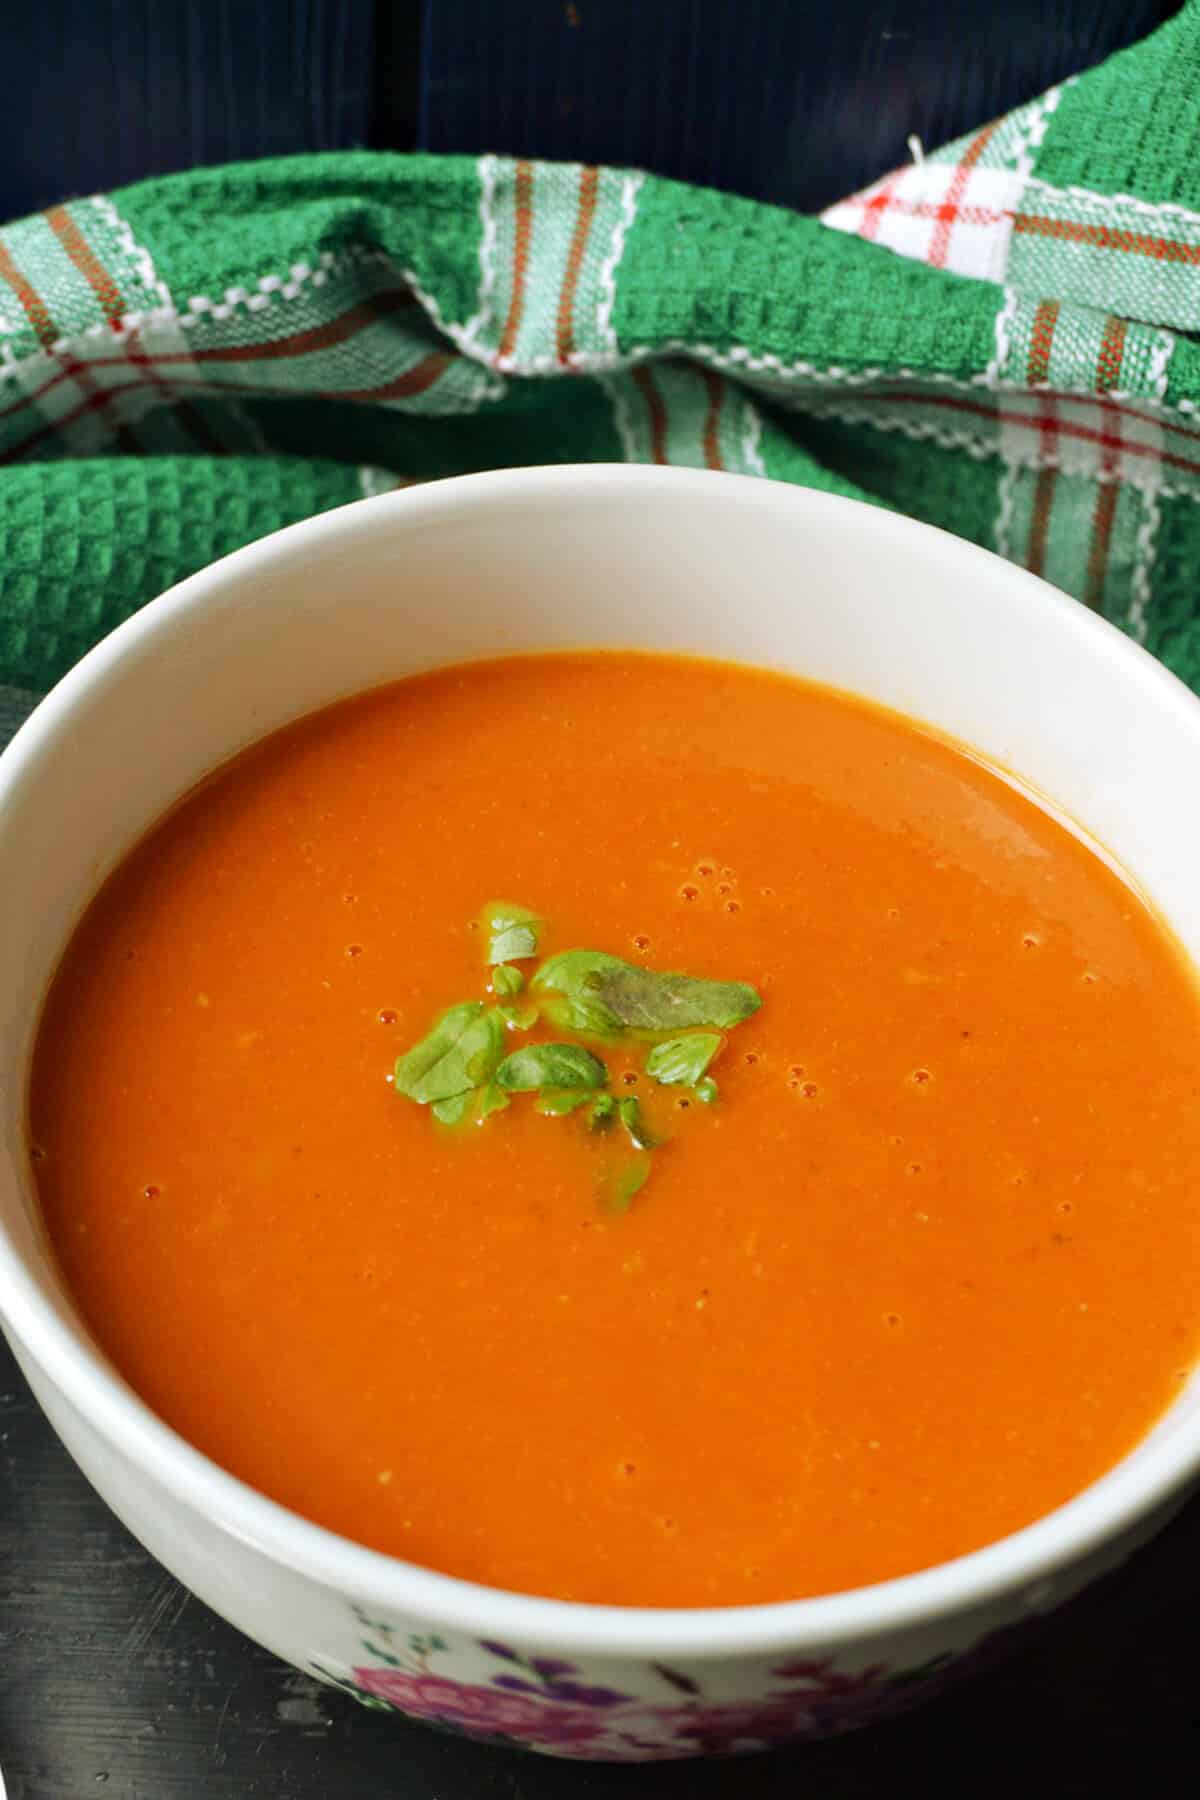 A bowl of creamed tomato soup with fresh basil leaves on top.